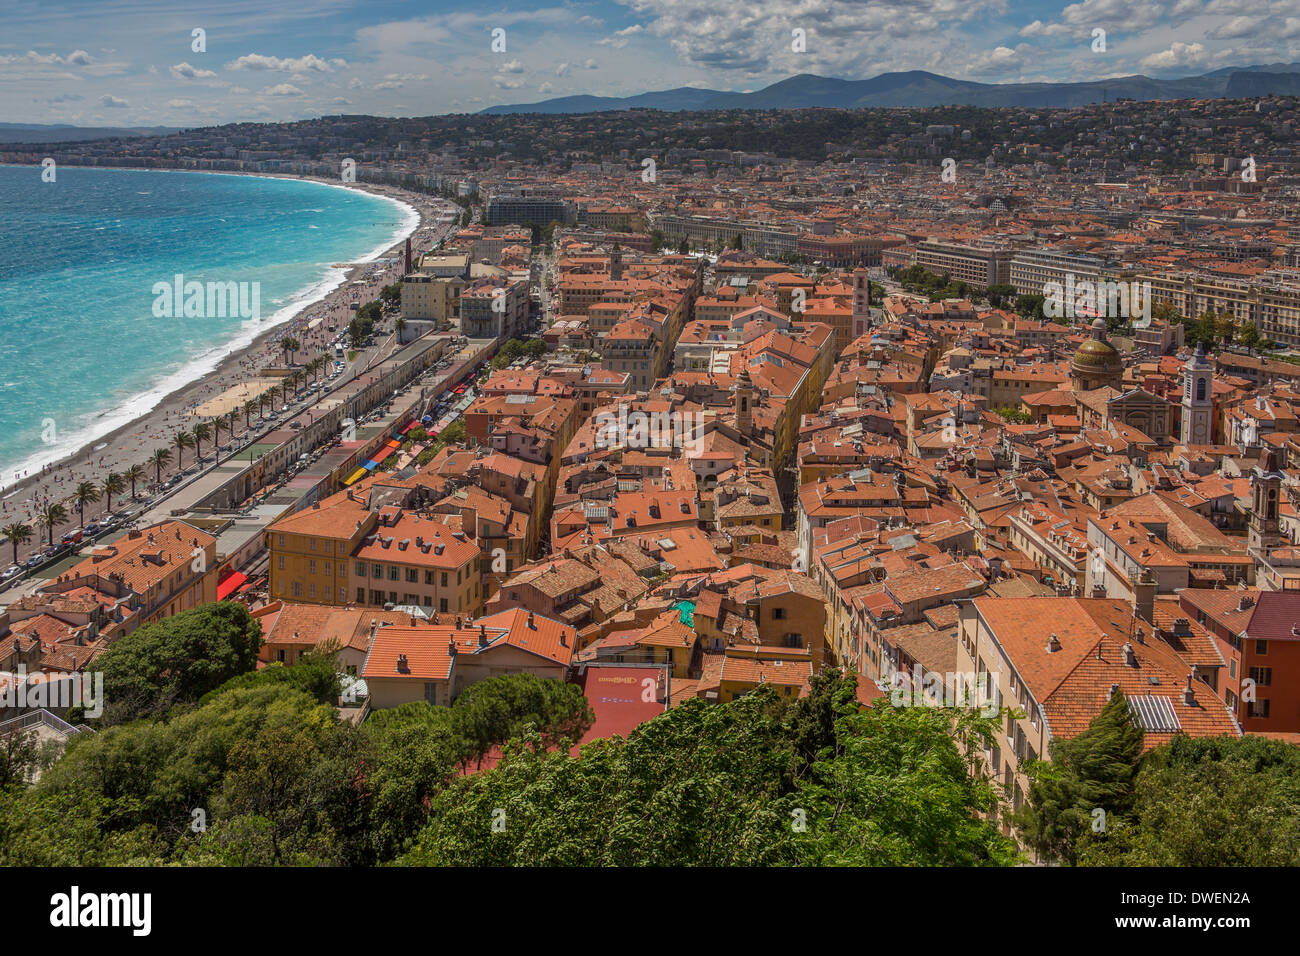 The city of Nice on the Cote d'Azur in the South of France. Stock Photo